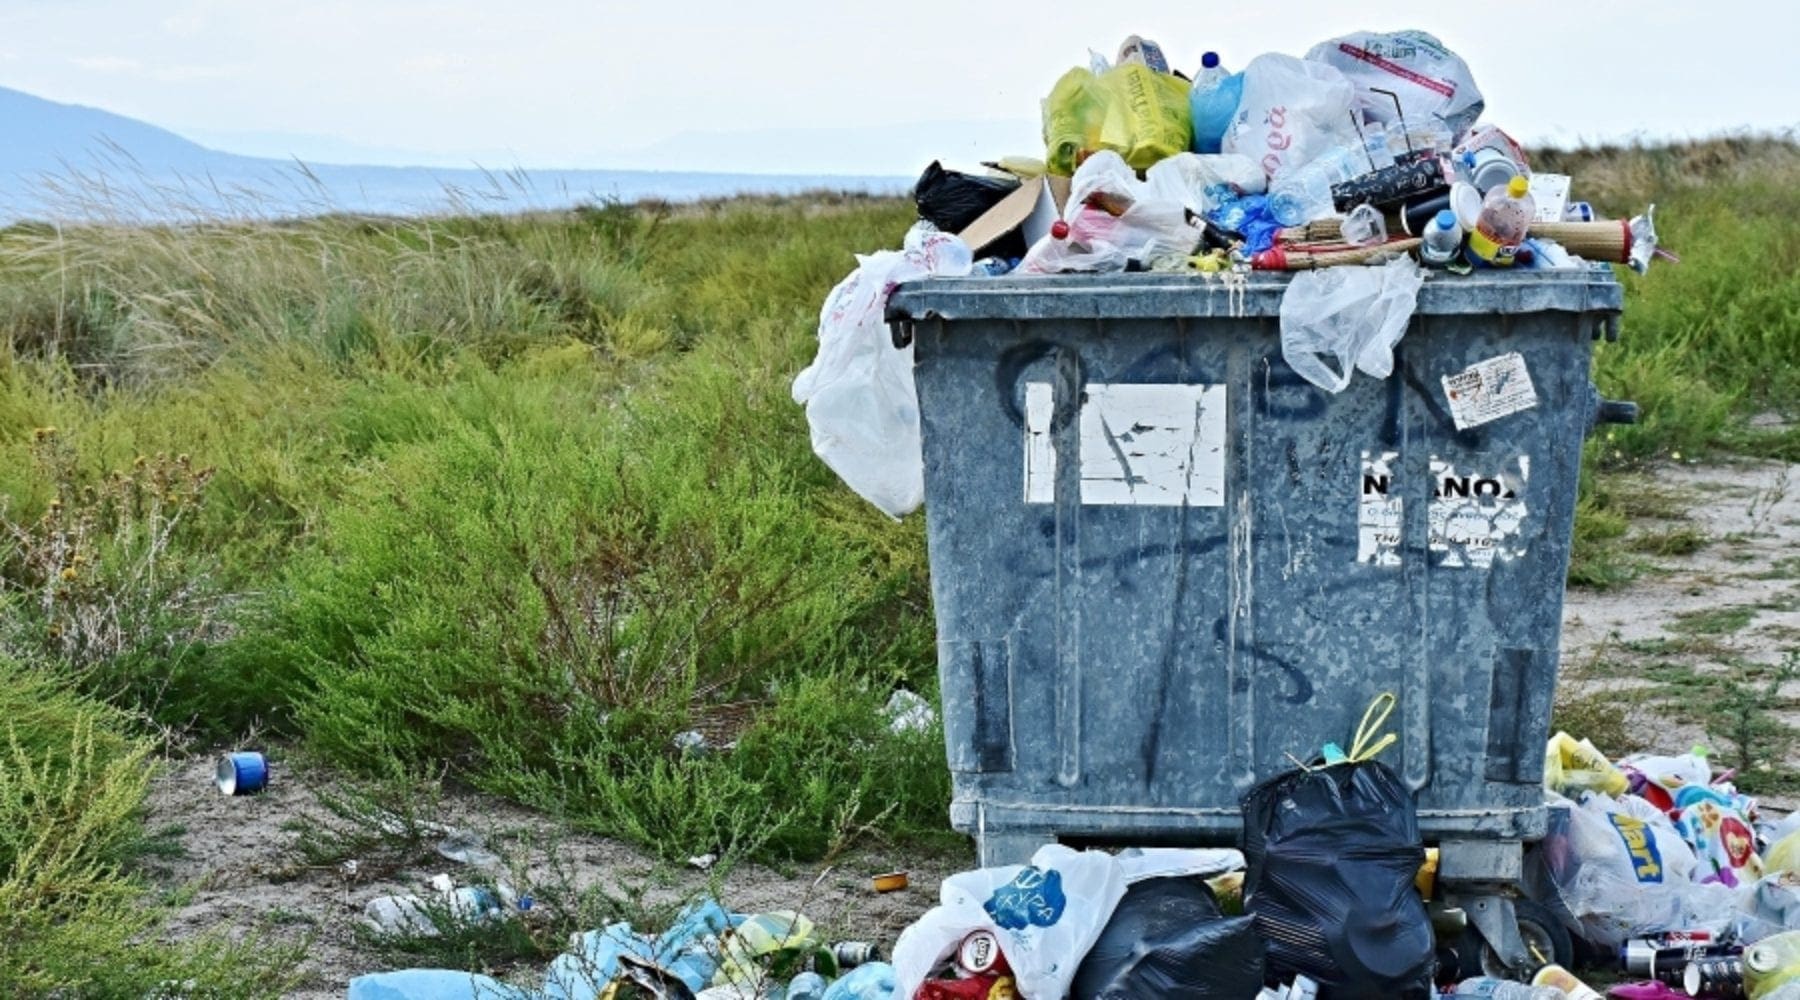 Report: Many ‘Recyclables’ Mislabeled, End Up in Landfill